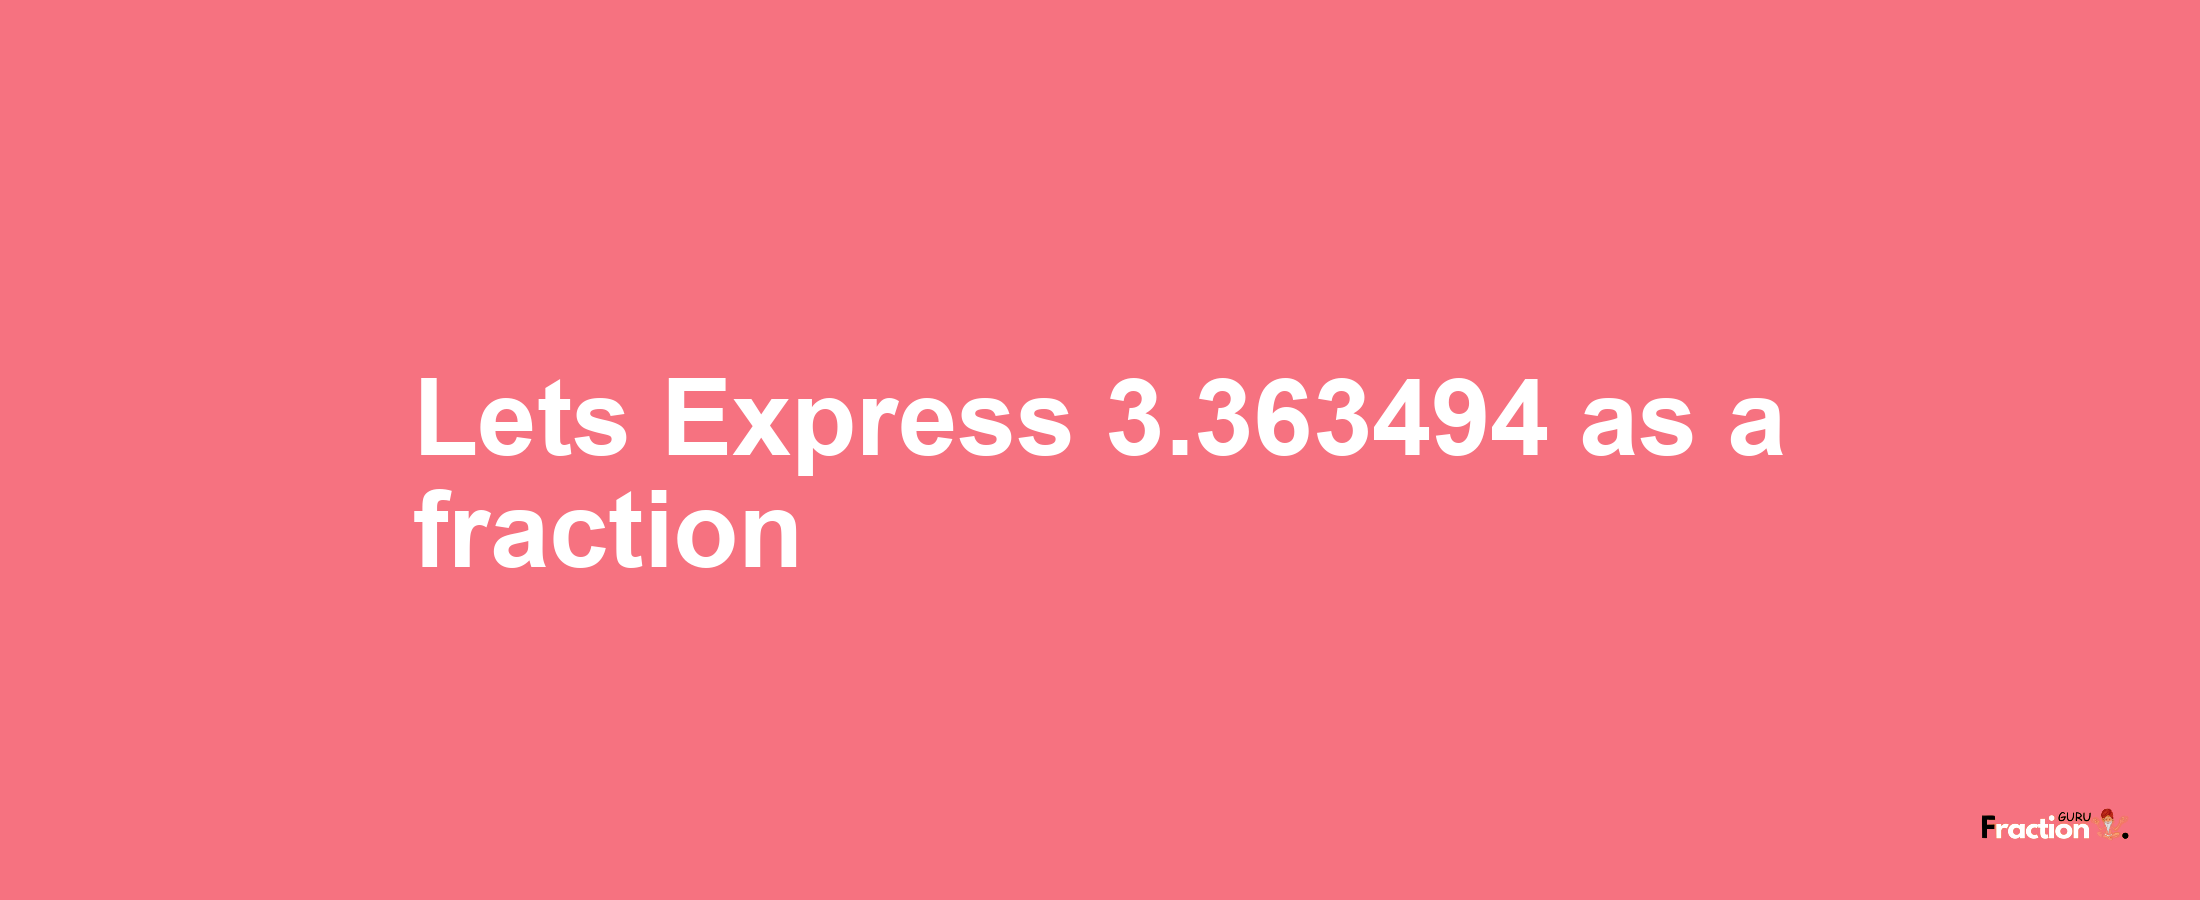 Lets Express 3.363494 as afraction